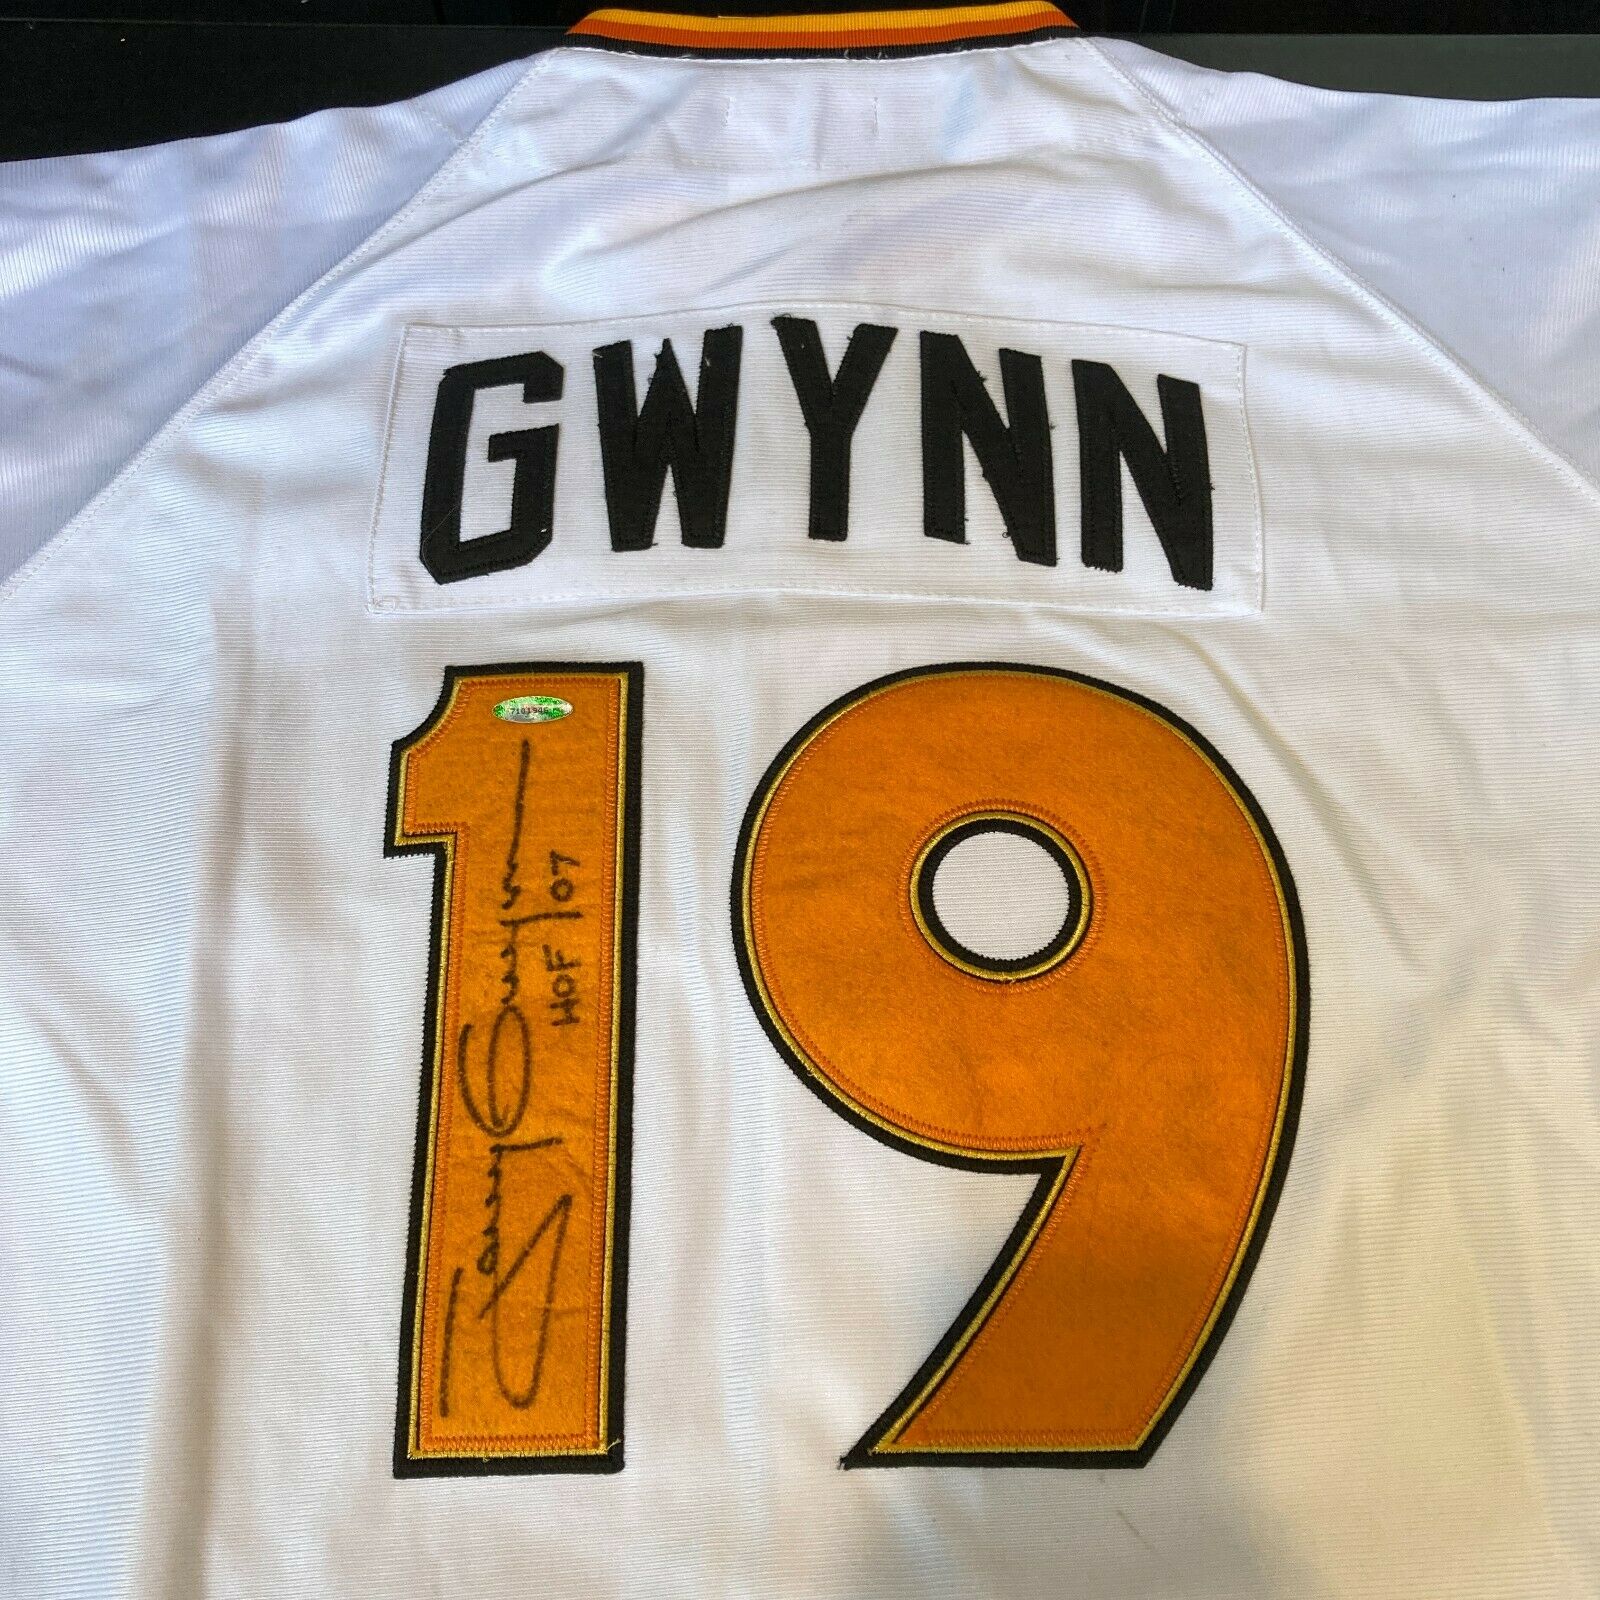 Tony Gwynn Autographed Jersey - 1984 SD Mitchell & Ness inscribed